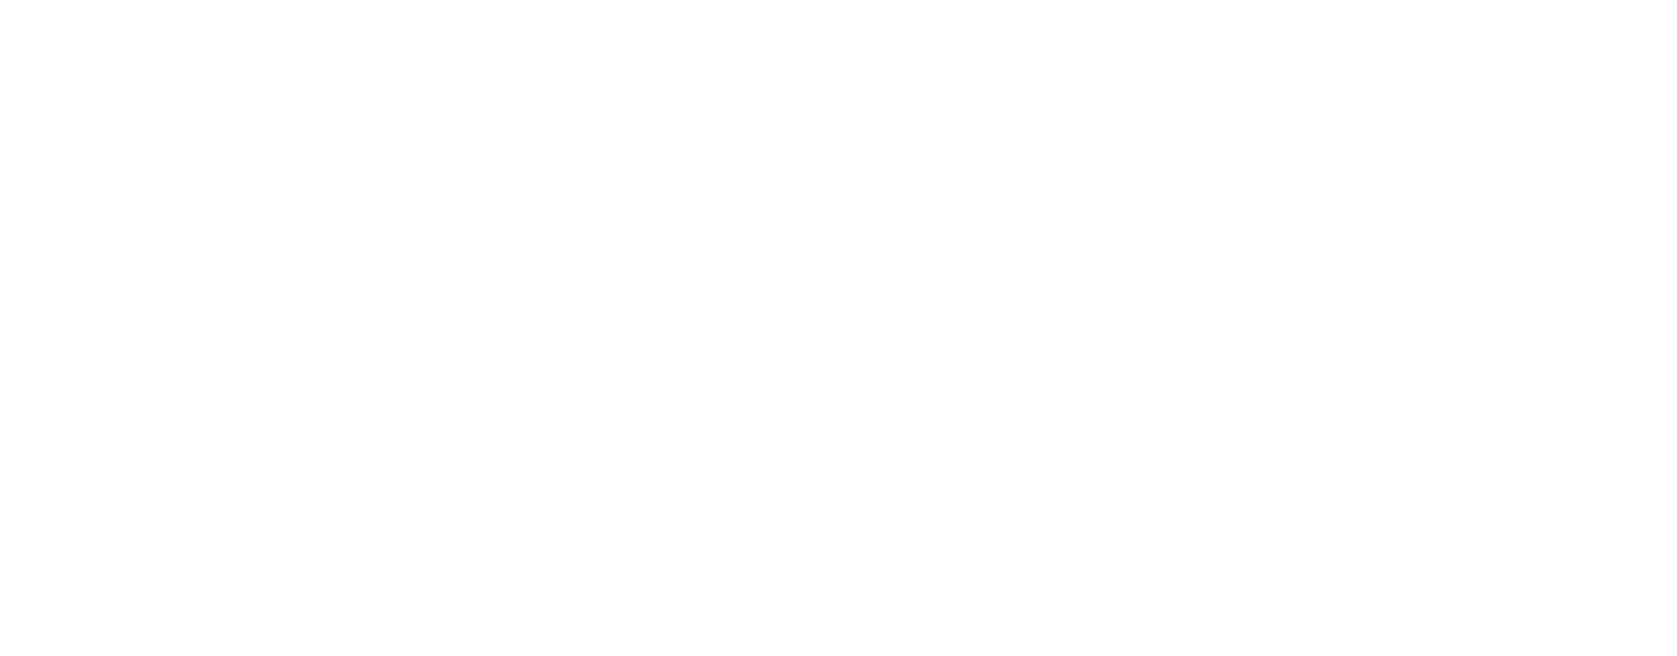 Southern High Points Consulting